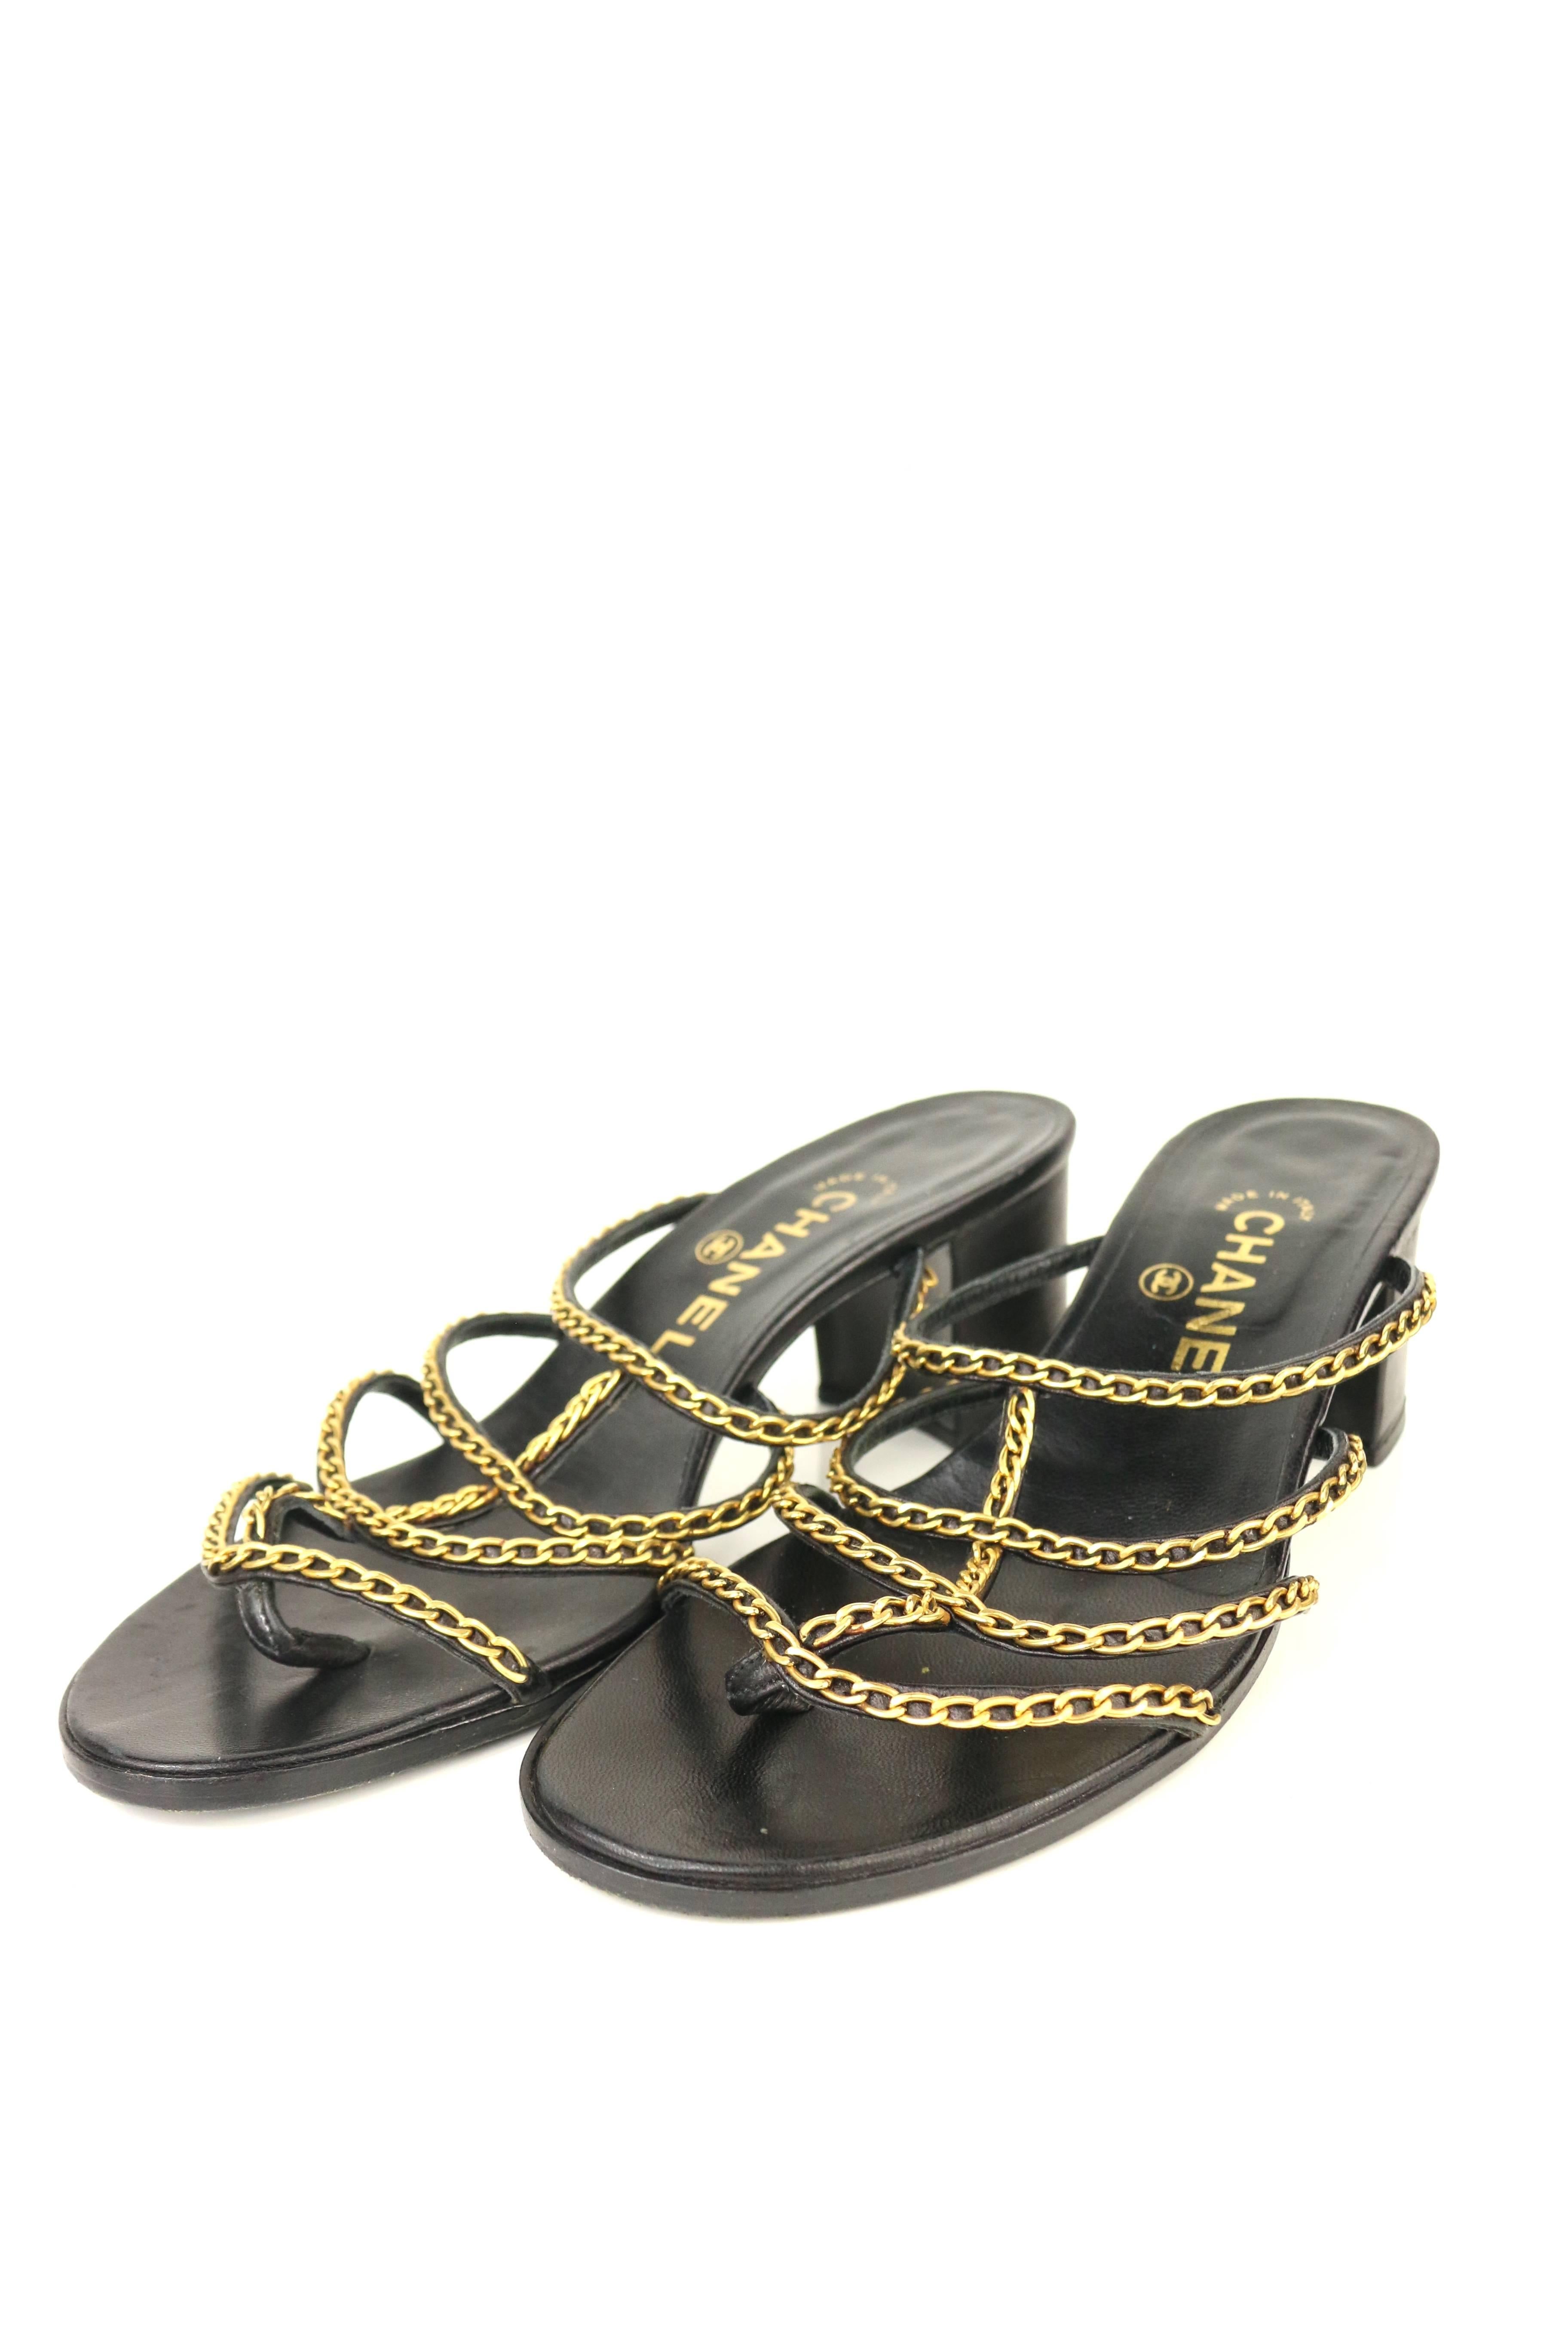 Women's Chanel Black Leather Gold Chain Heeled Sandals   For Sale